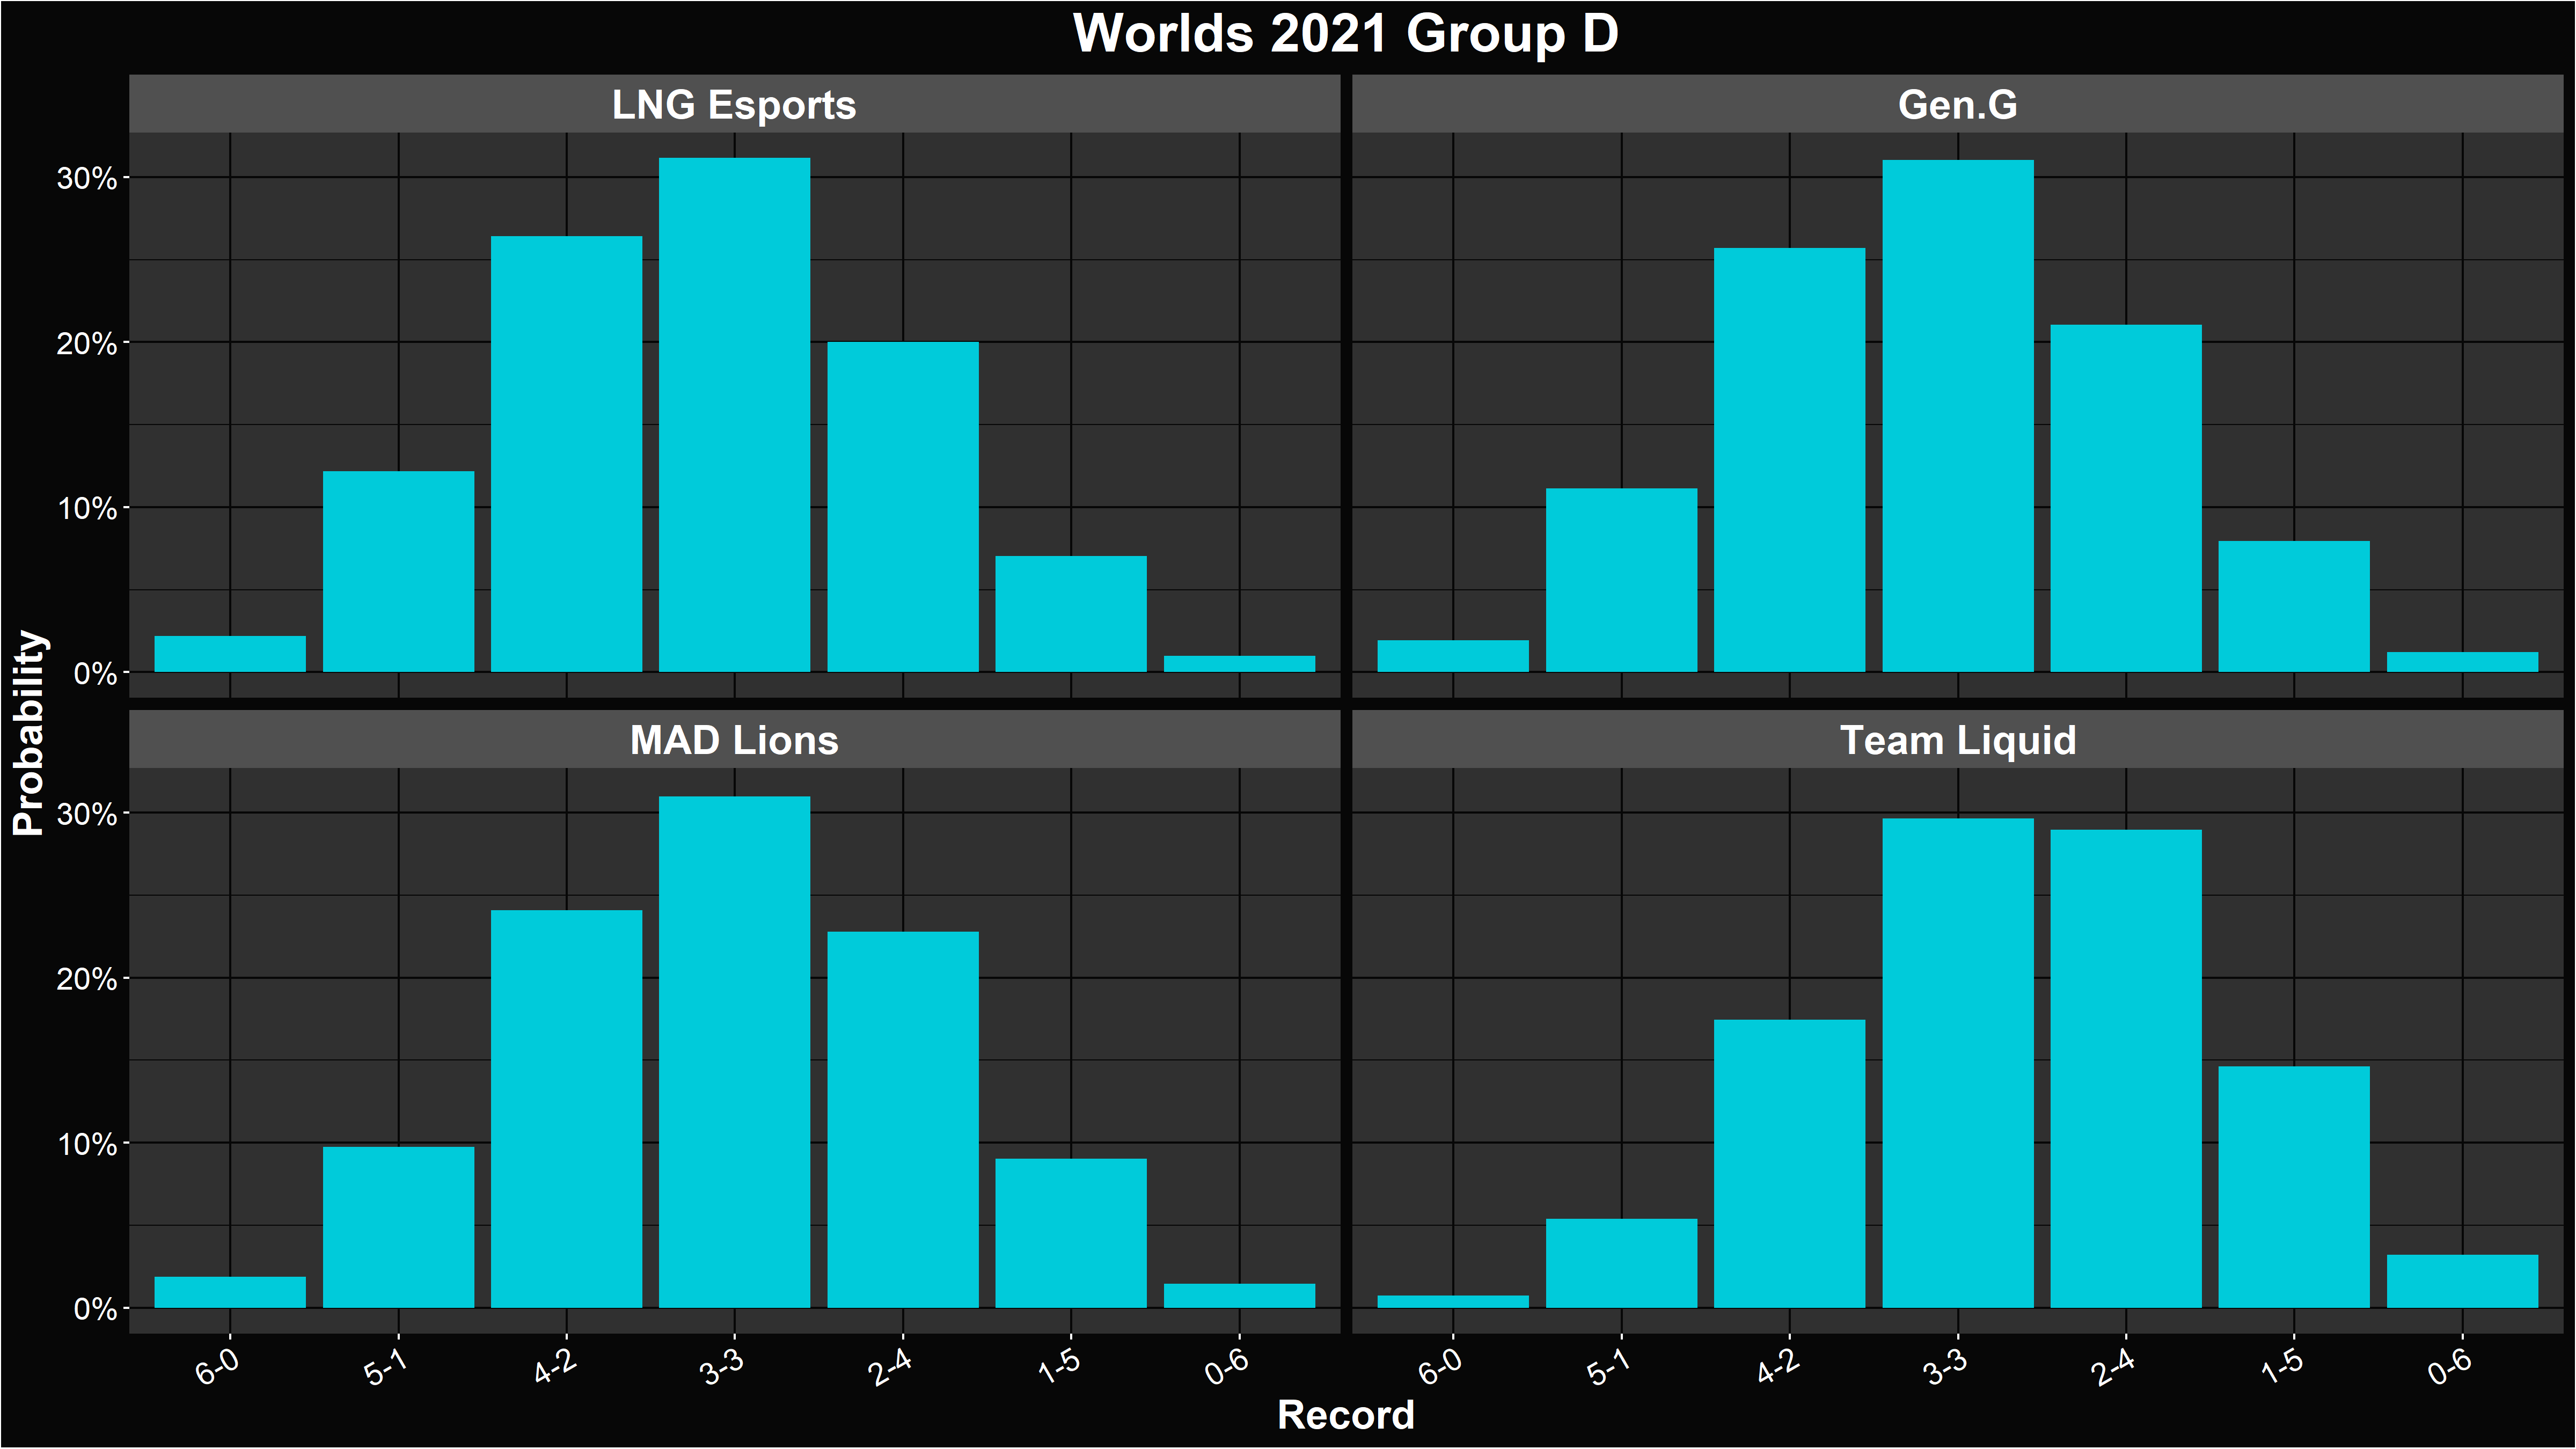 Alacrity's LoL Worlds 2021 Group D Record Distributions